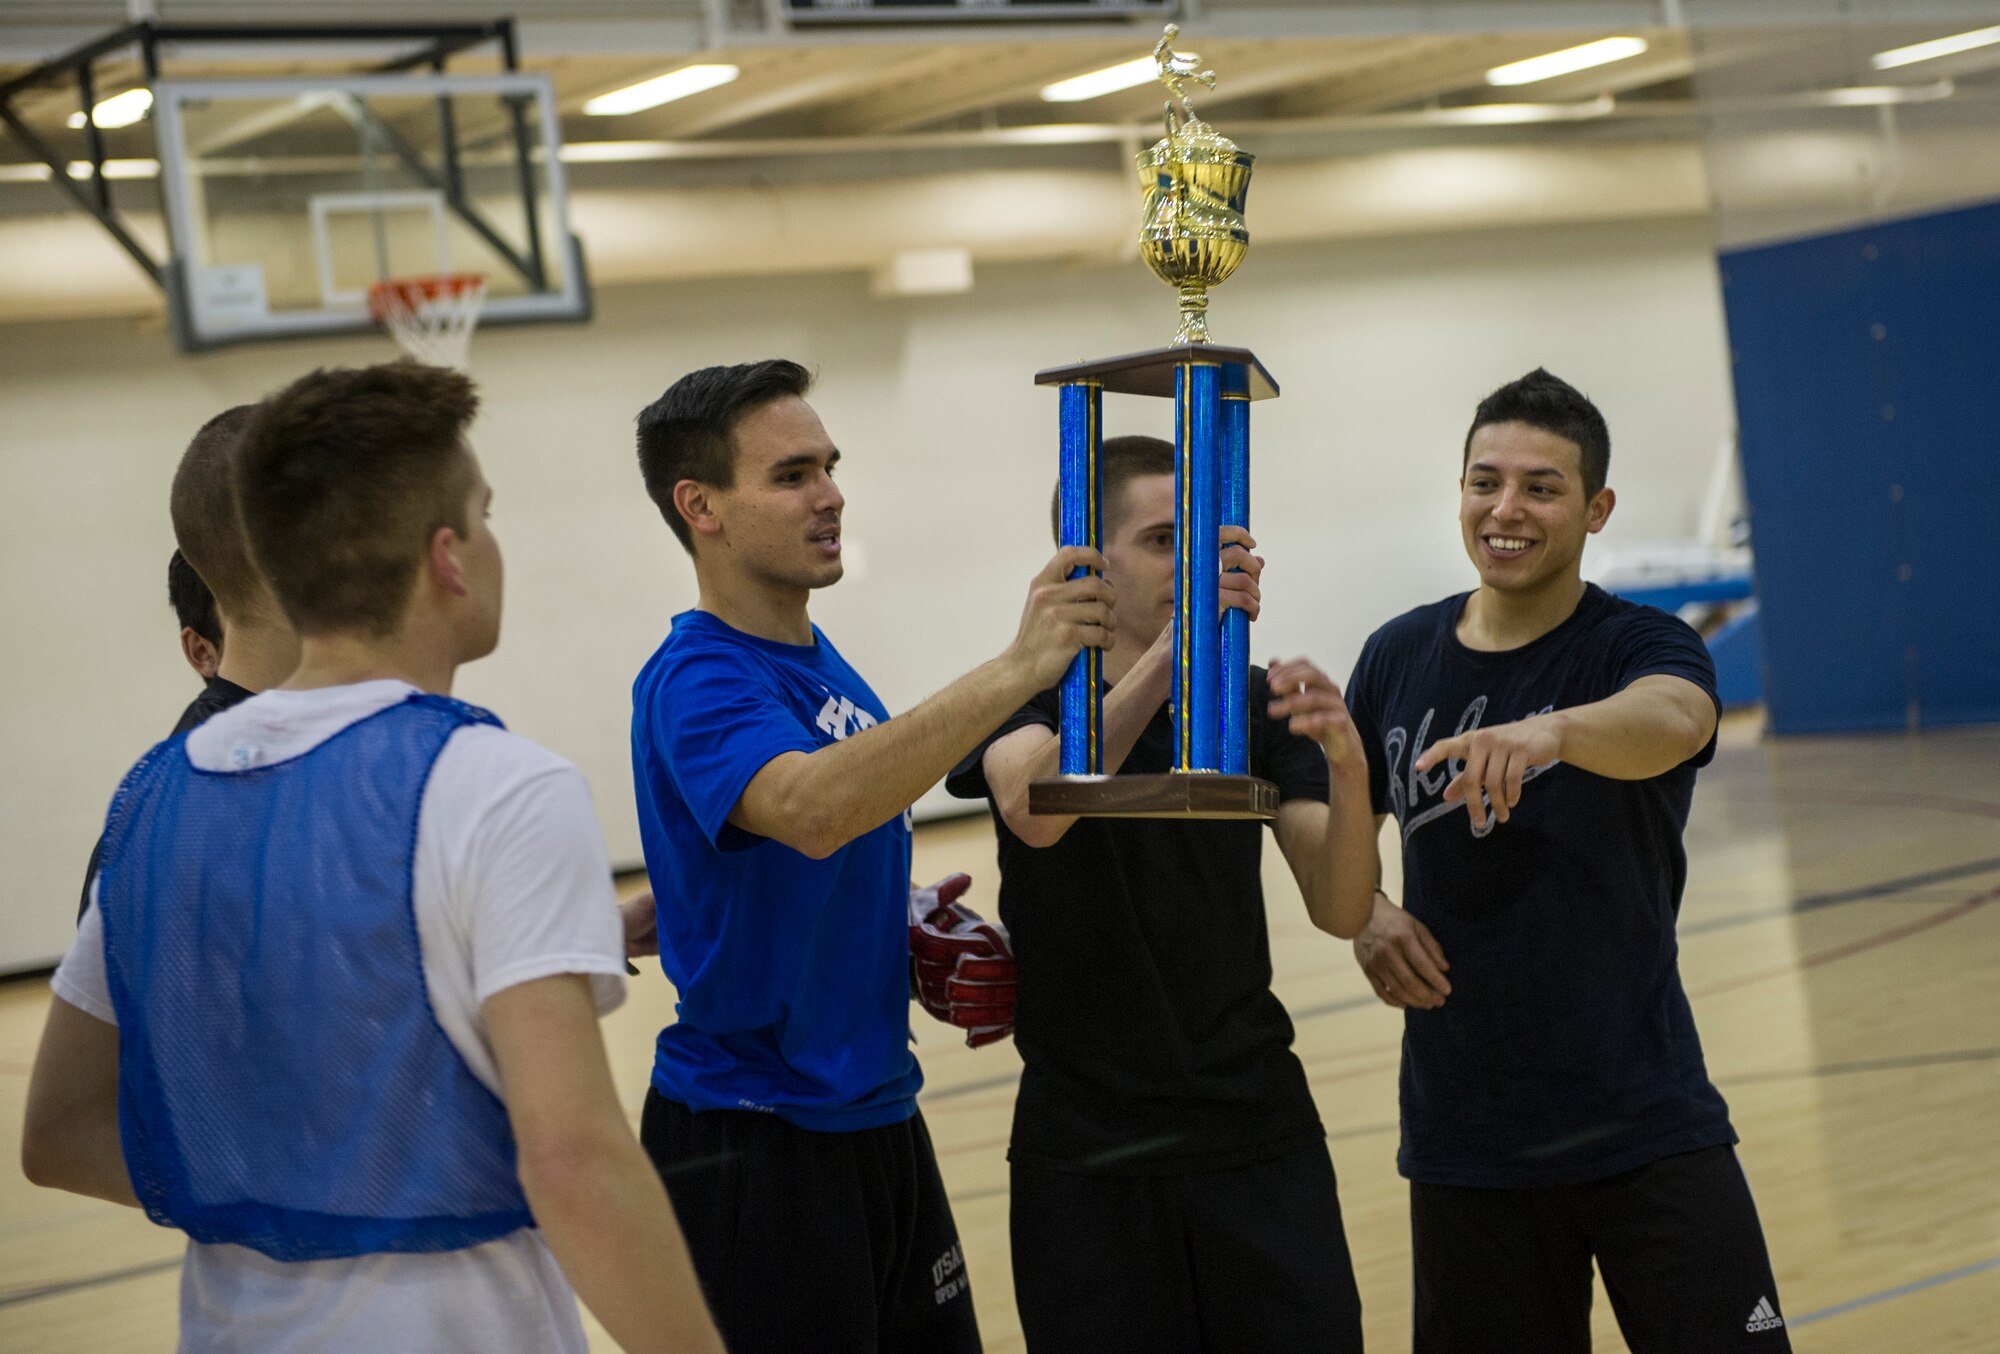 The 5th Contracting Squadron team celebrates their victory after the intramural indoor soccer championship at Minot Air Force Base, N.D., Nov. 24, 2015. After coming down to penalty kicks, 5th CONS beat the 5th Medical Group team. (U.S. Air Force photo/Senior Airman Apryl Hall)